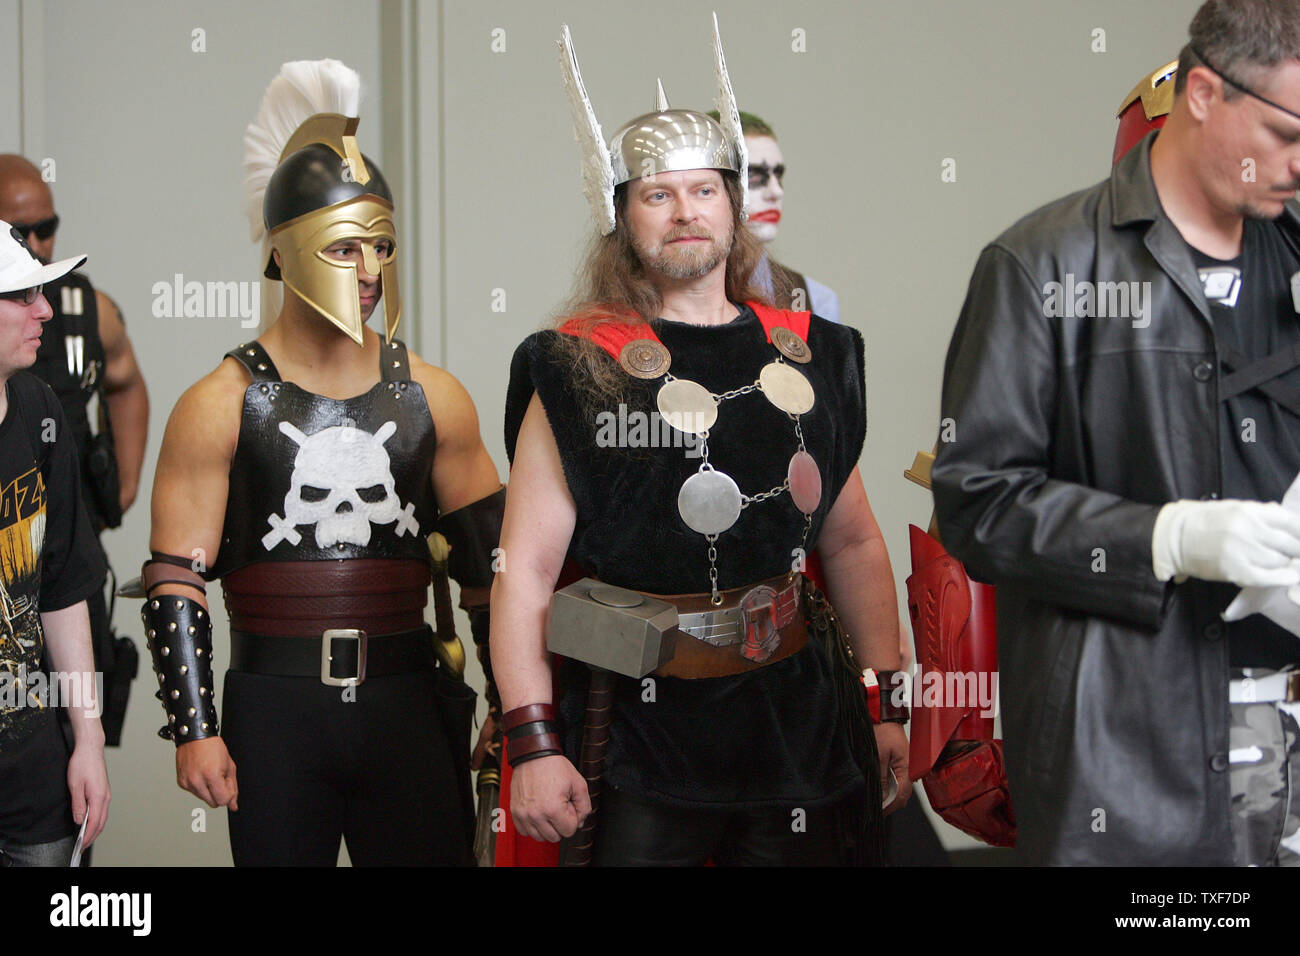 David Santiago (L) as Ares, God of War, and Garrett Gird, as Thor, wait  with others to be judged for the costume contest at the 11th annual Comic  Con in Baltimore on